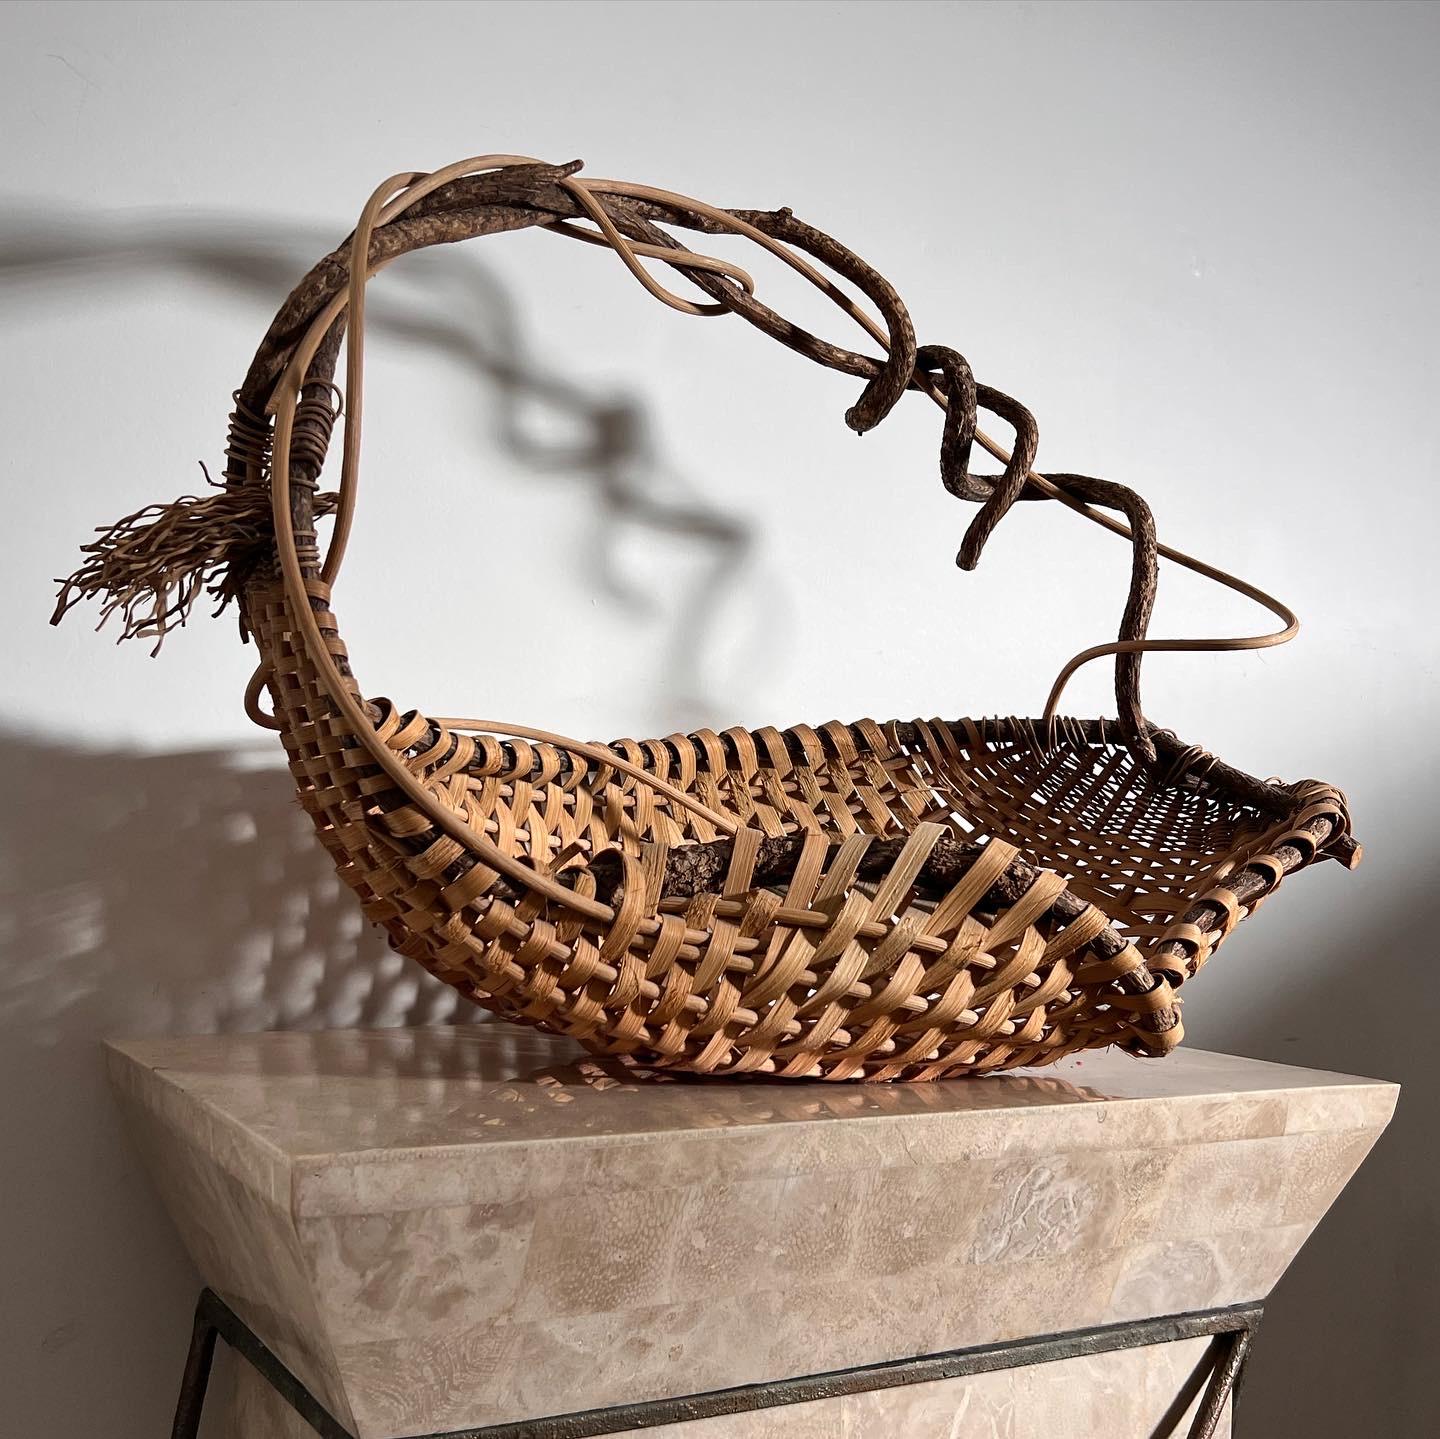 American Vintage Handwoven Wicker and Wood Decorative Basket by Artist, Late 20th Century